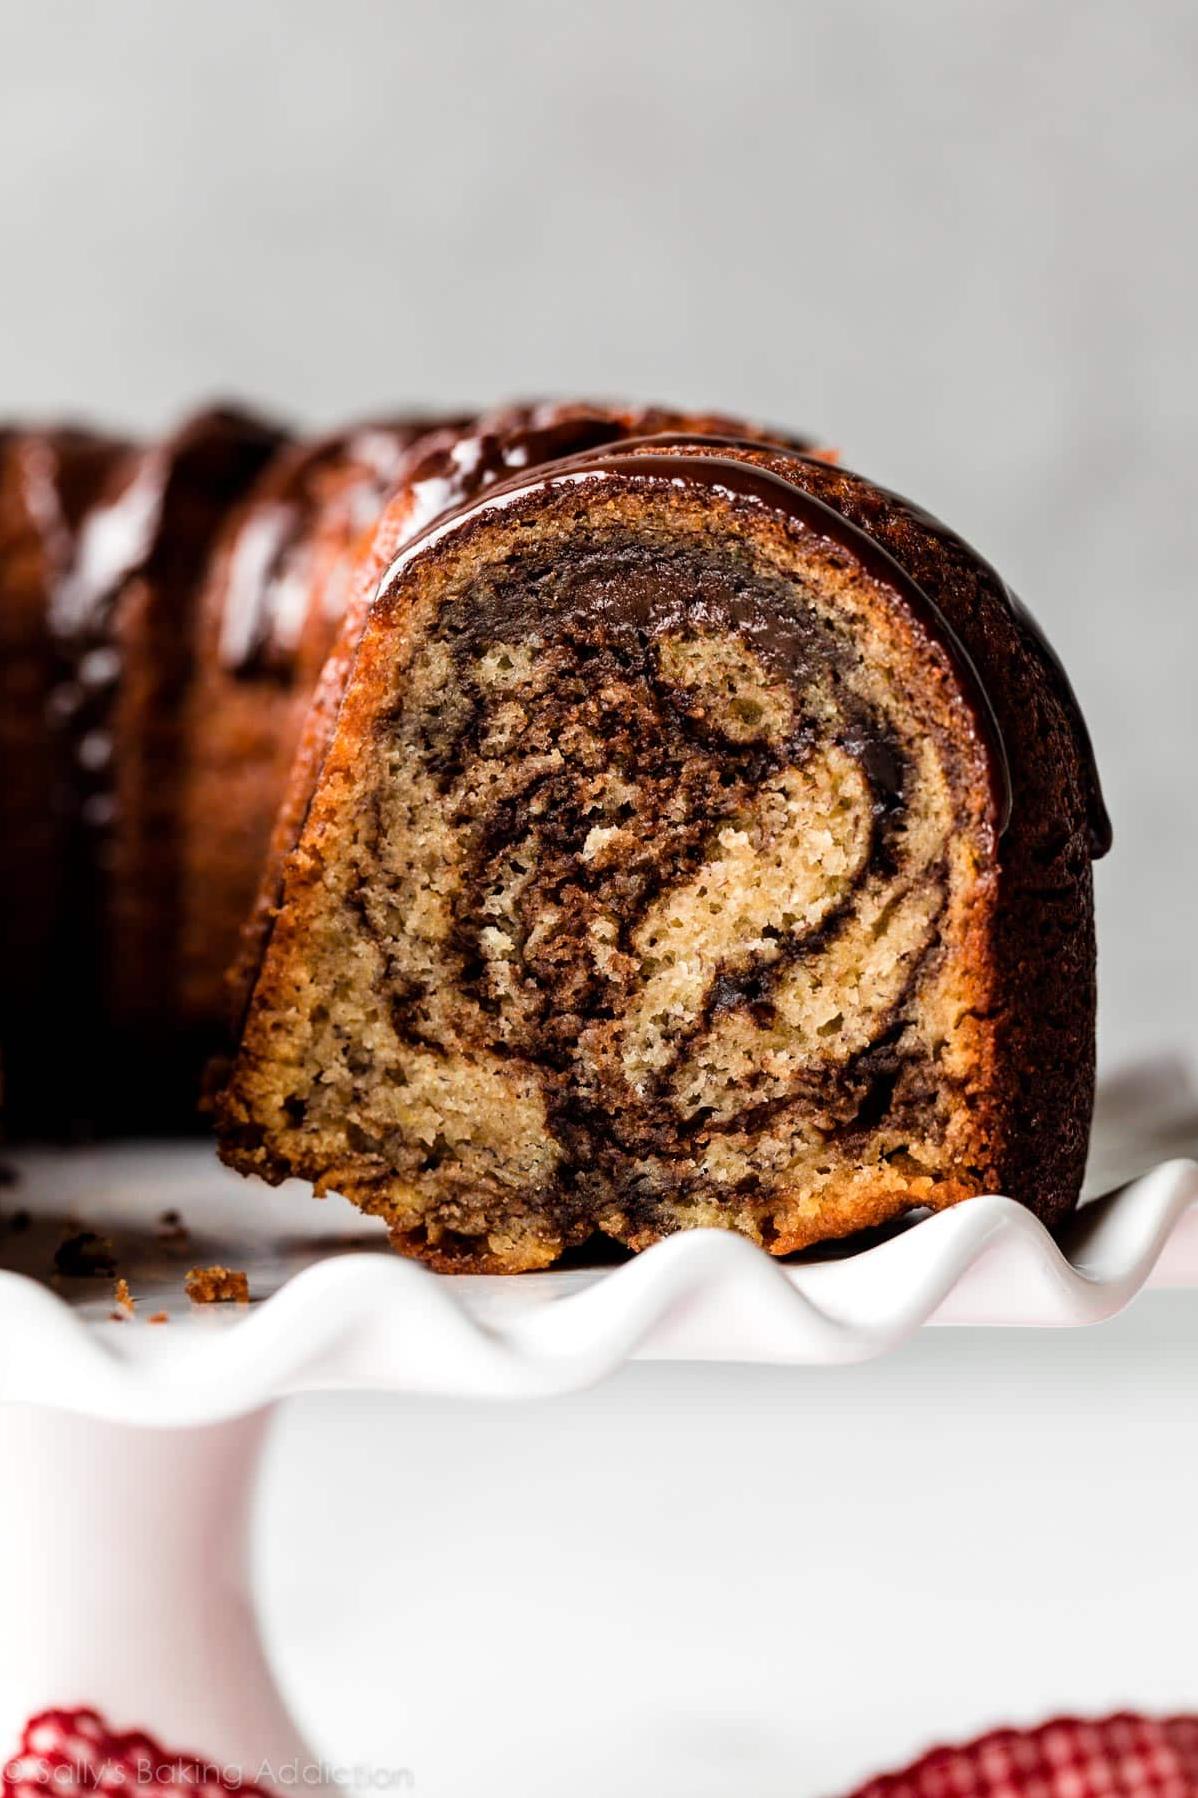  Enjoy the comforting smell of freshly baked goods permeating your home with each batch of our Chocolate Banana Pound Cake.